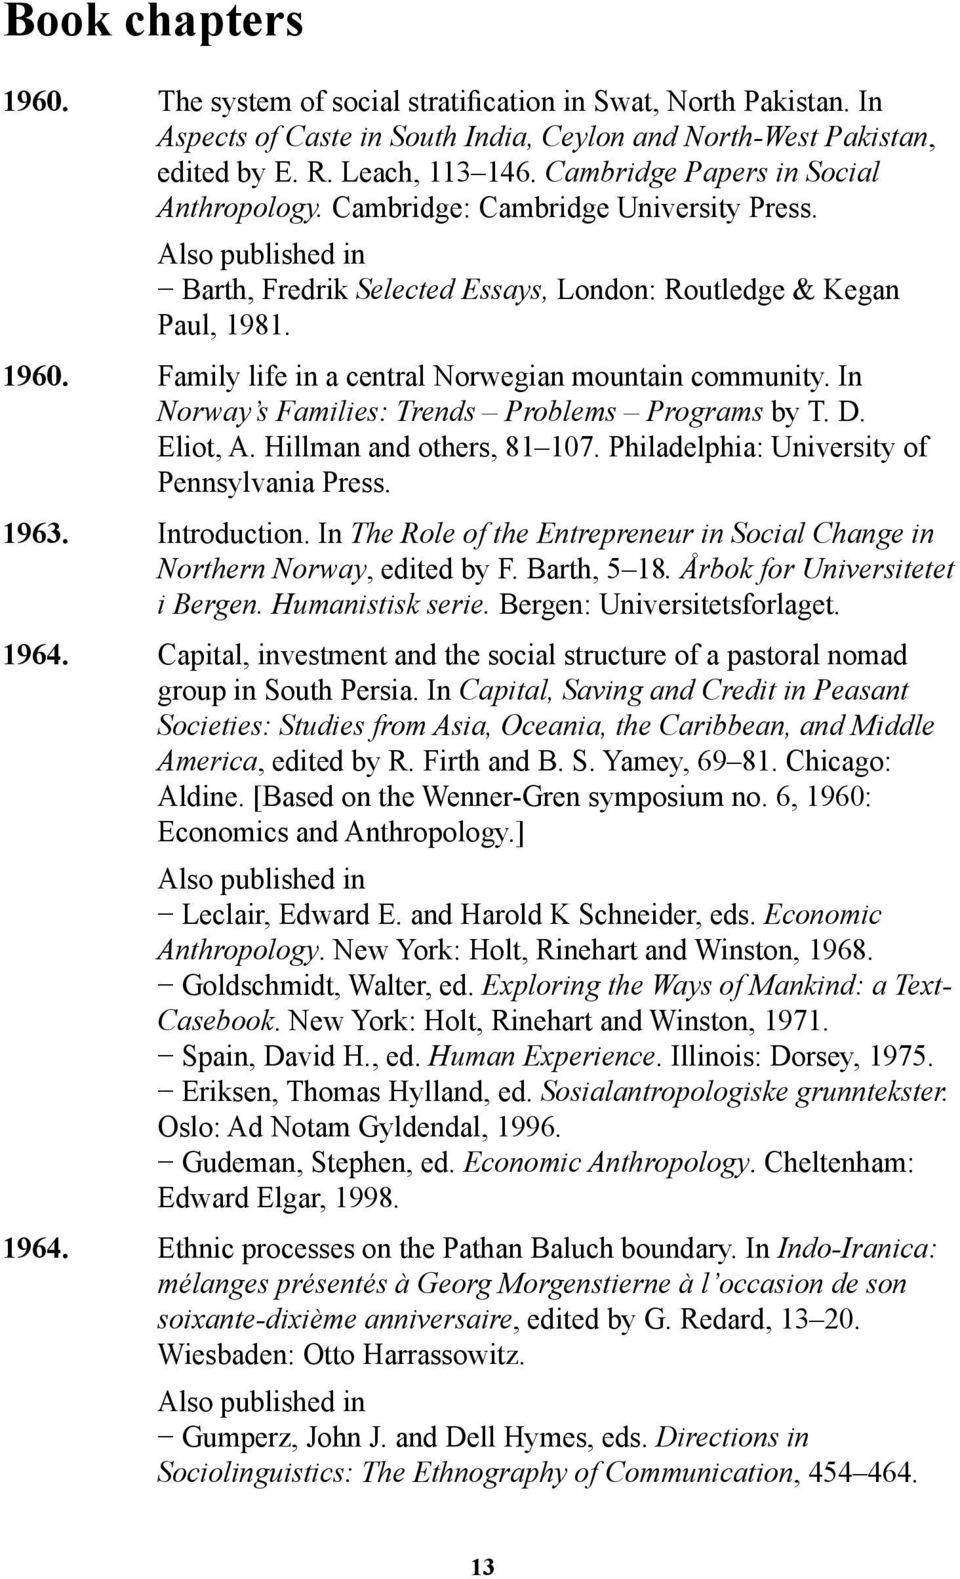 Family life in a central Norwegian mountain community. In Norway s Families: Trends Problems Programs by T. D. Eliot, A. Hillman and others, 81 107. Philadelphia: University of Pennsylvania Press.